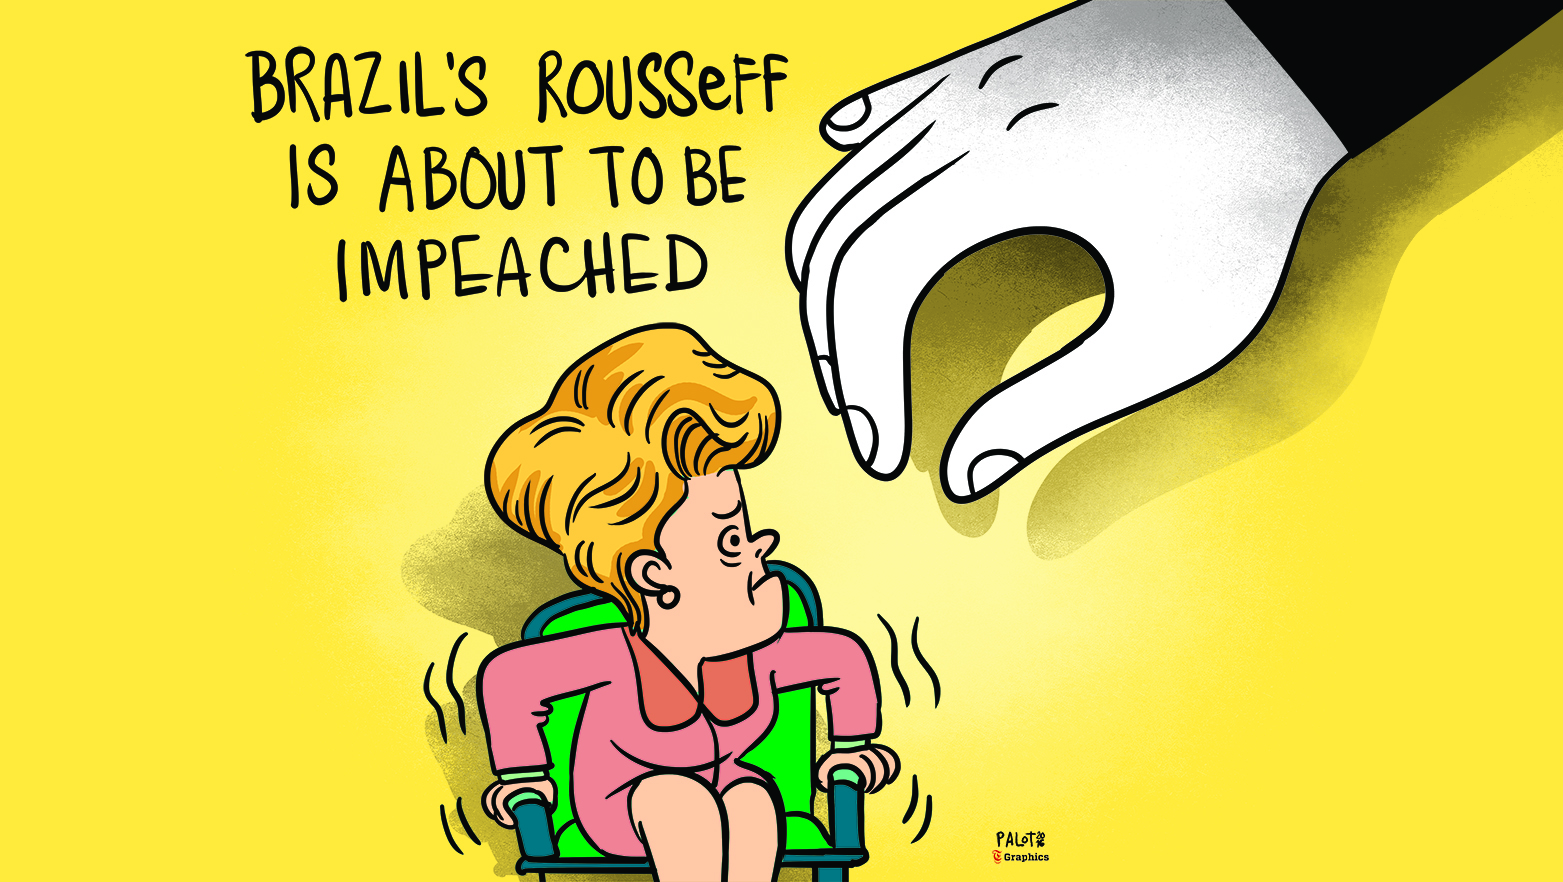 Brazil's Rousseff is about to be impeached